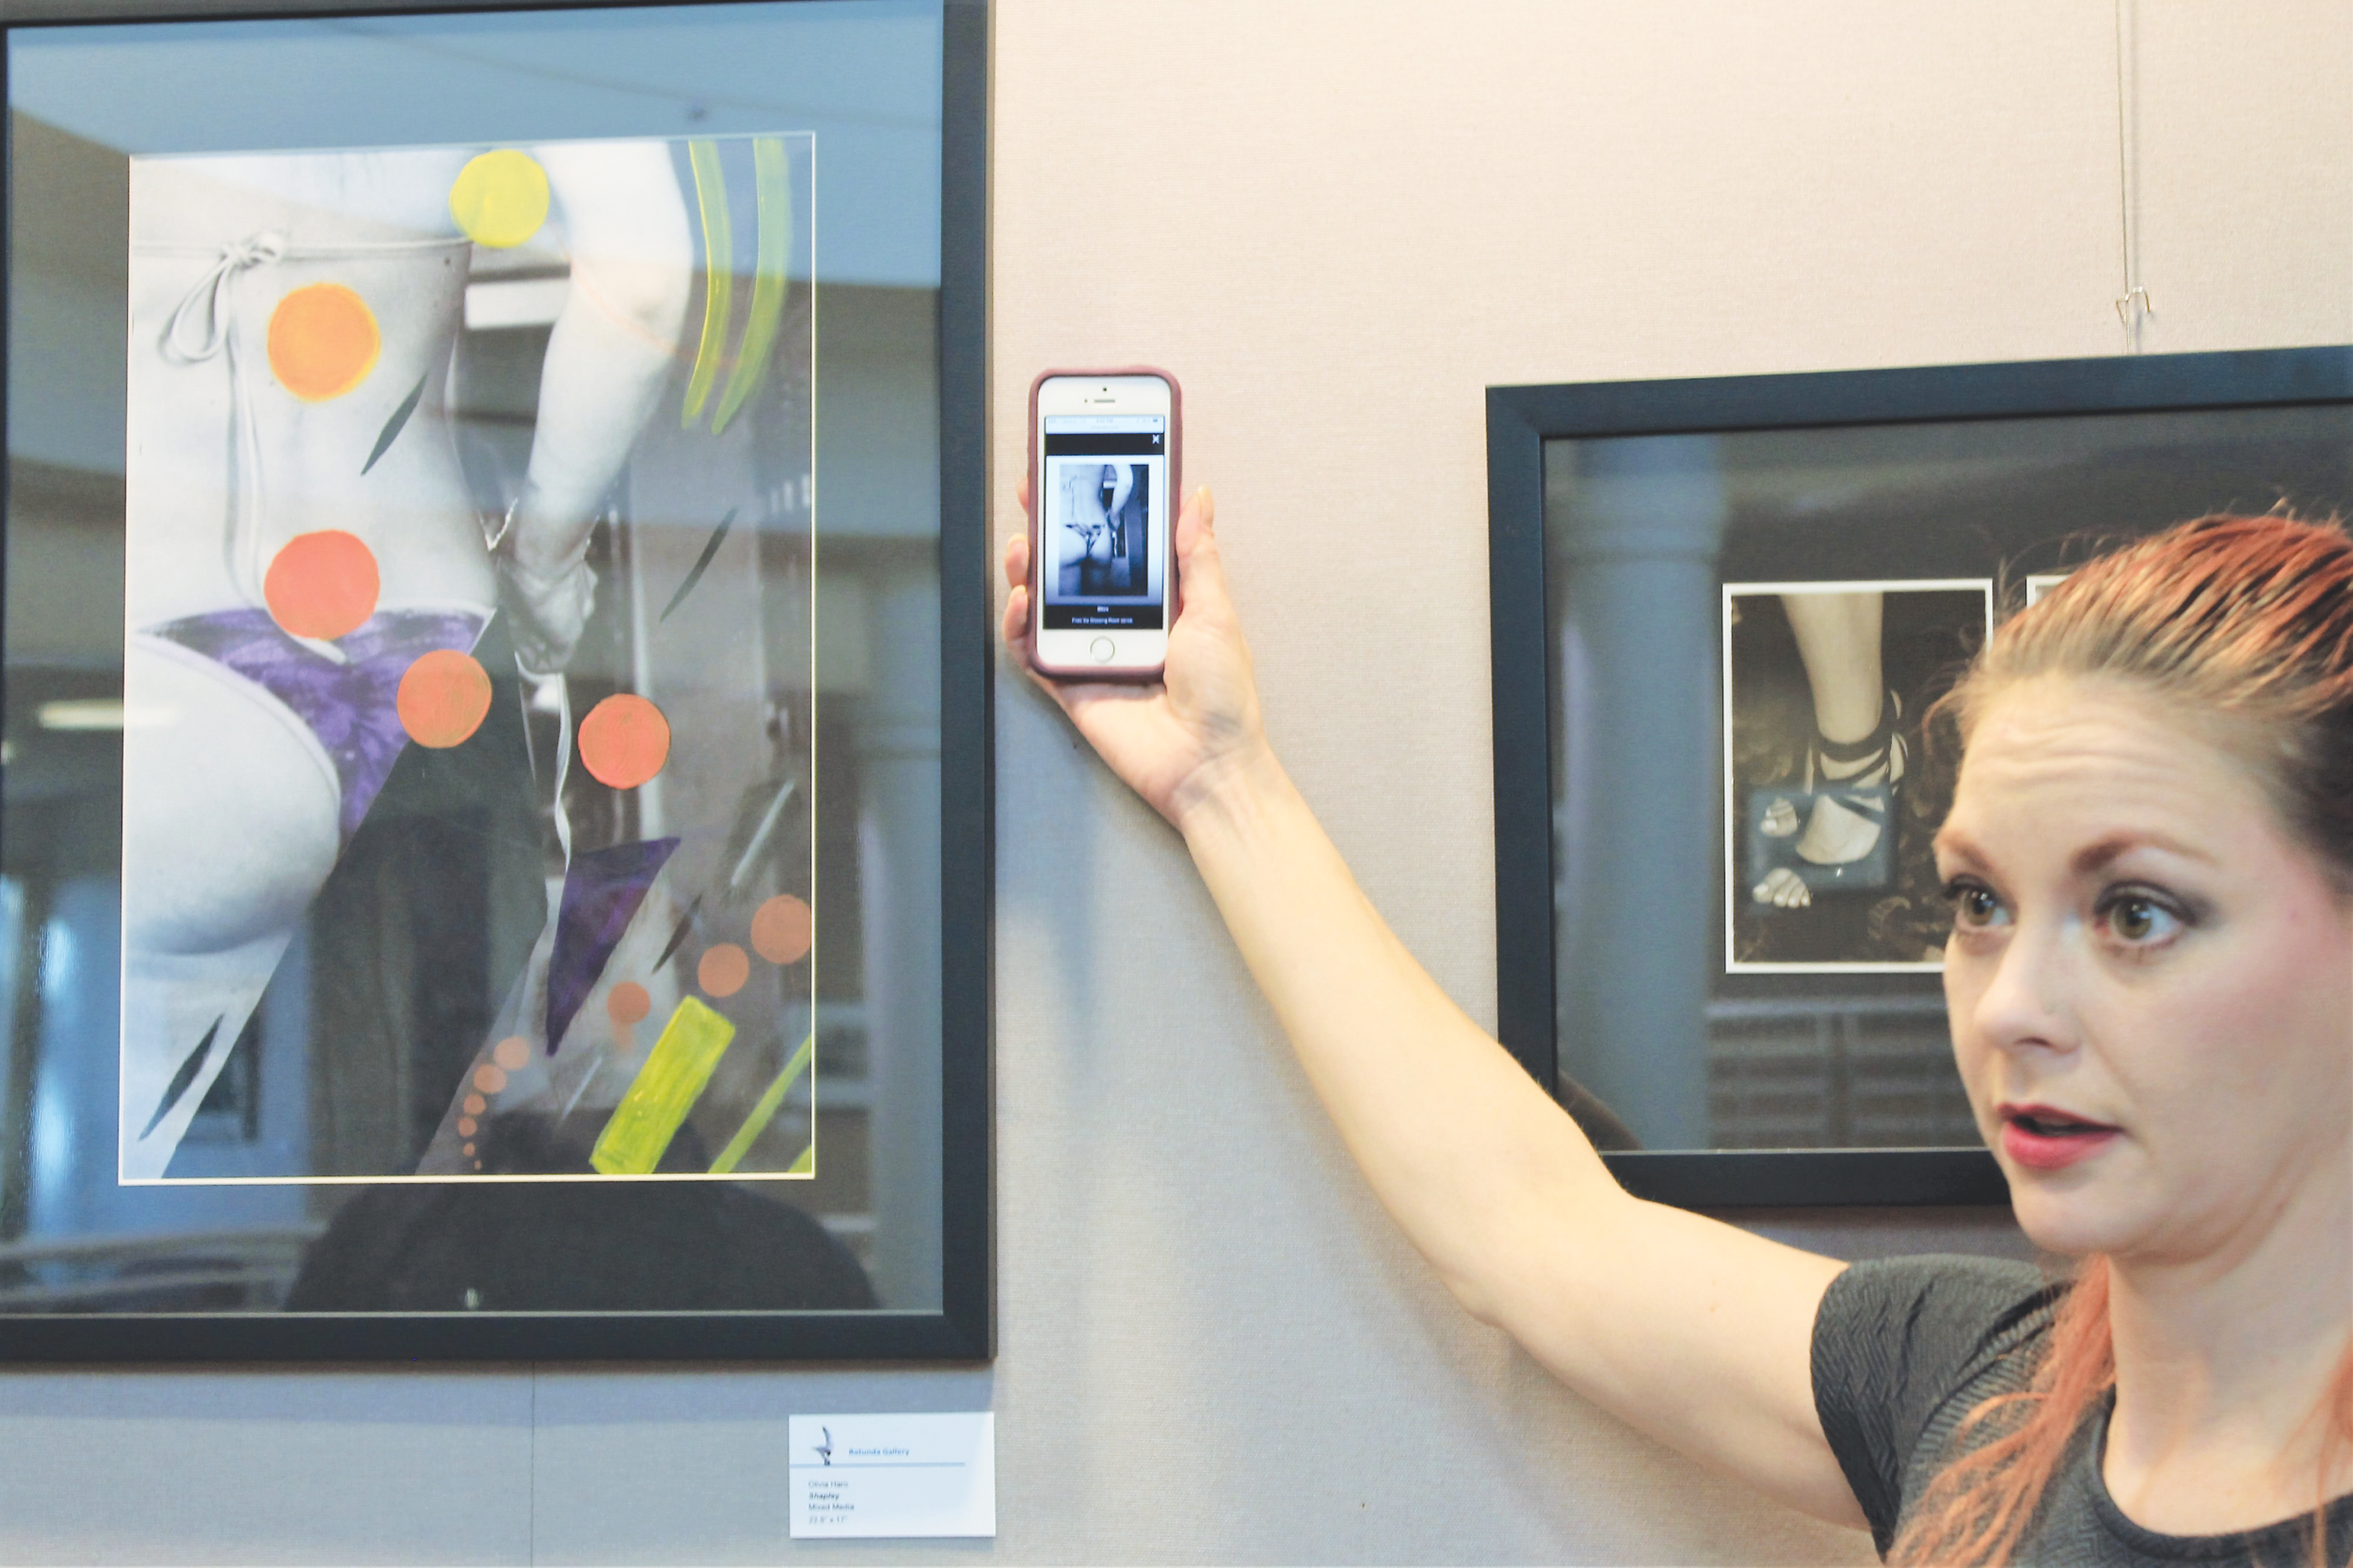 Olivia Haro, is a working artist and teacher for the community learning department at COCC. Haro contrasts an original image of an exotic dancer on her phone with her acrylic and pastel augmented work, titled "Shapley."